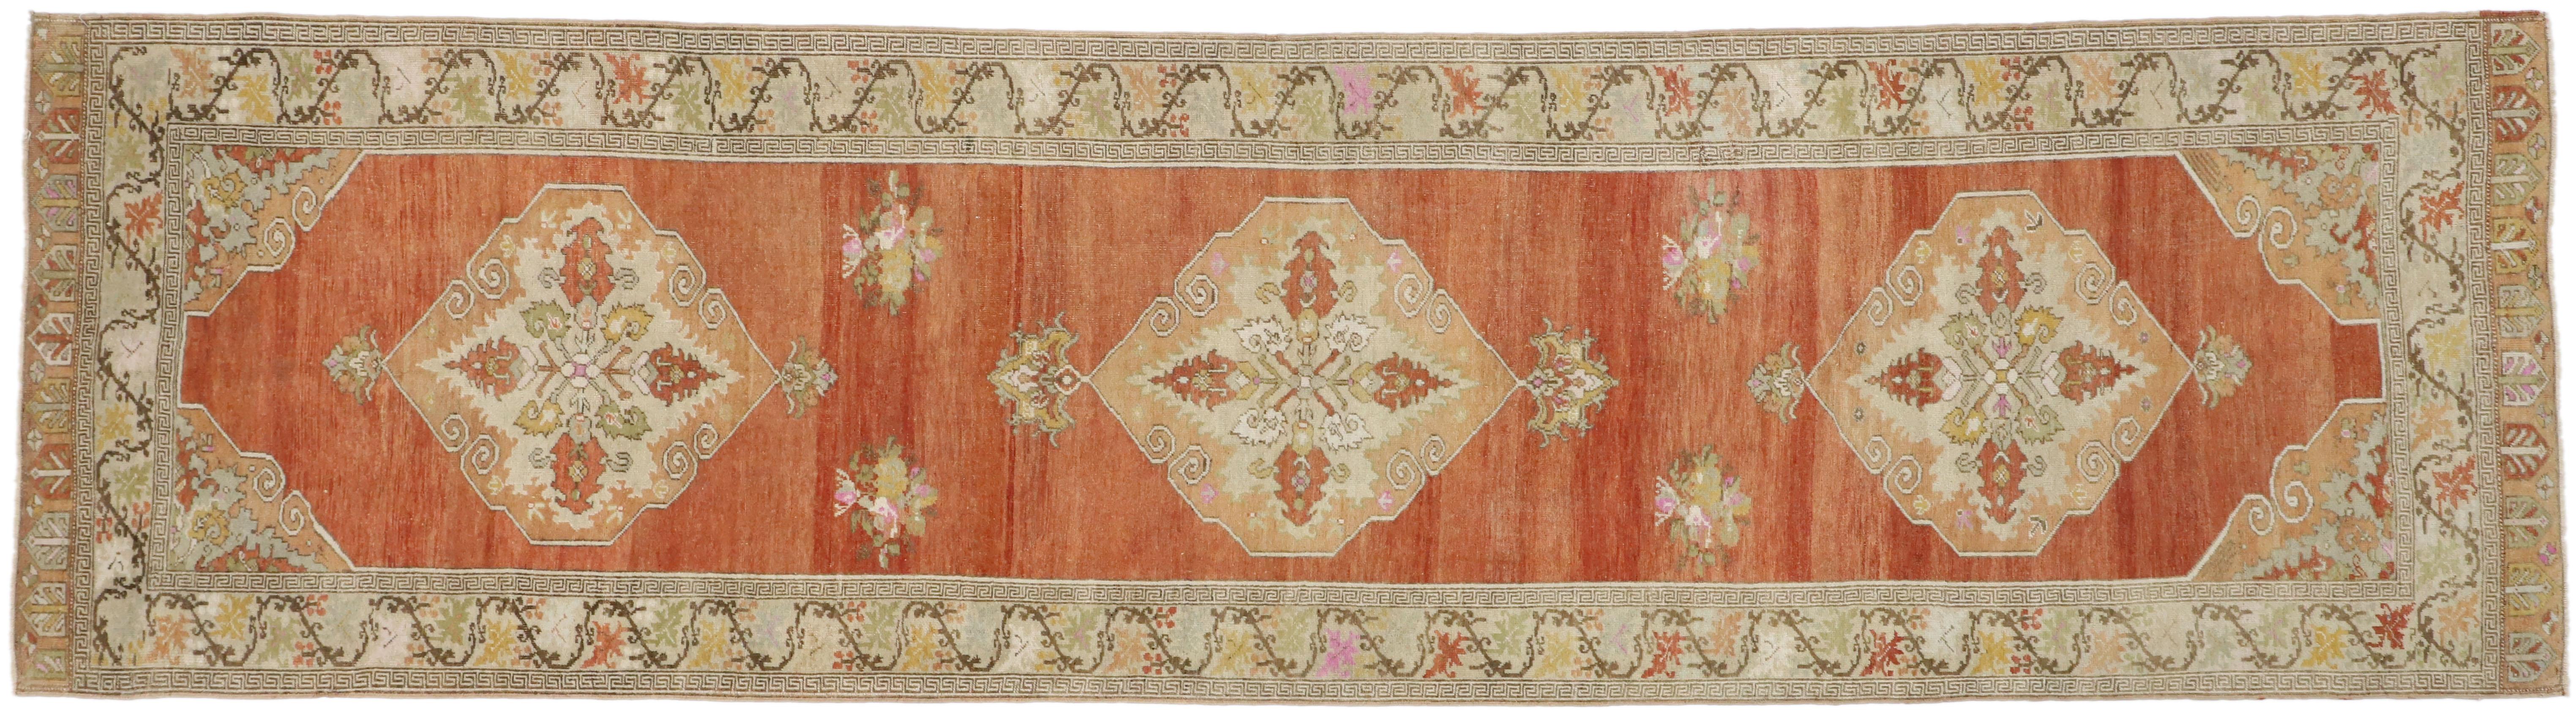 Vintage Turkish Oushak Runner with Feminine Rustic Arts & Crafts Style For Sale 3